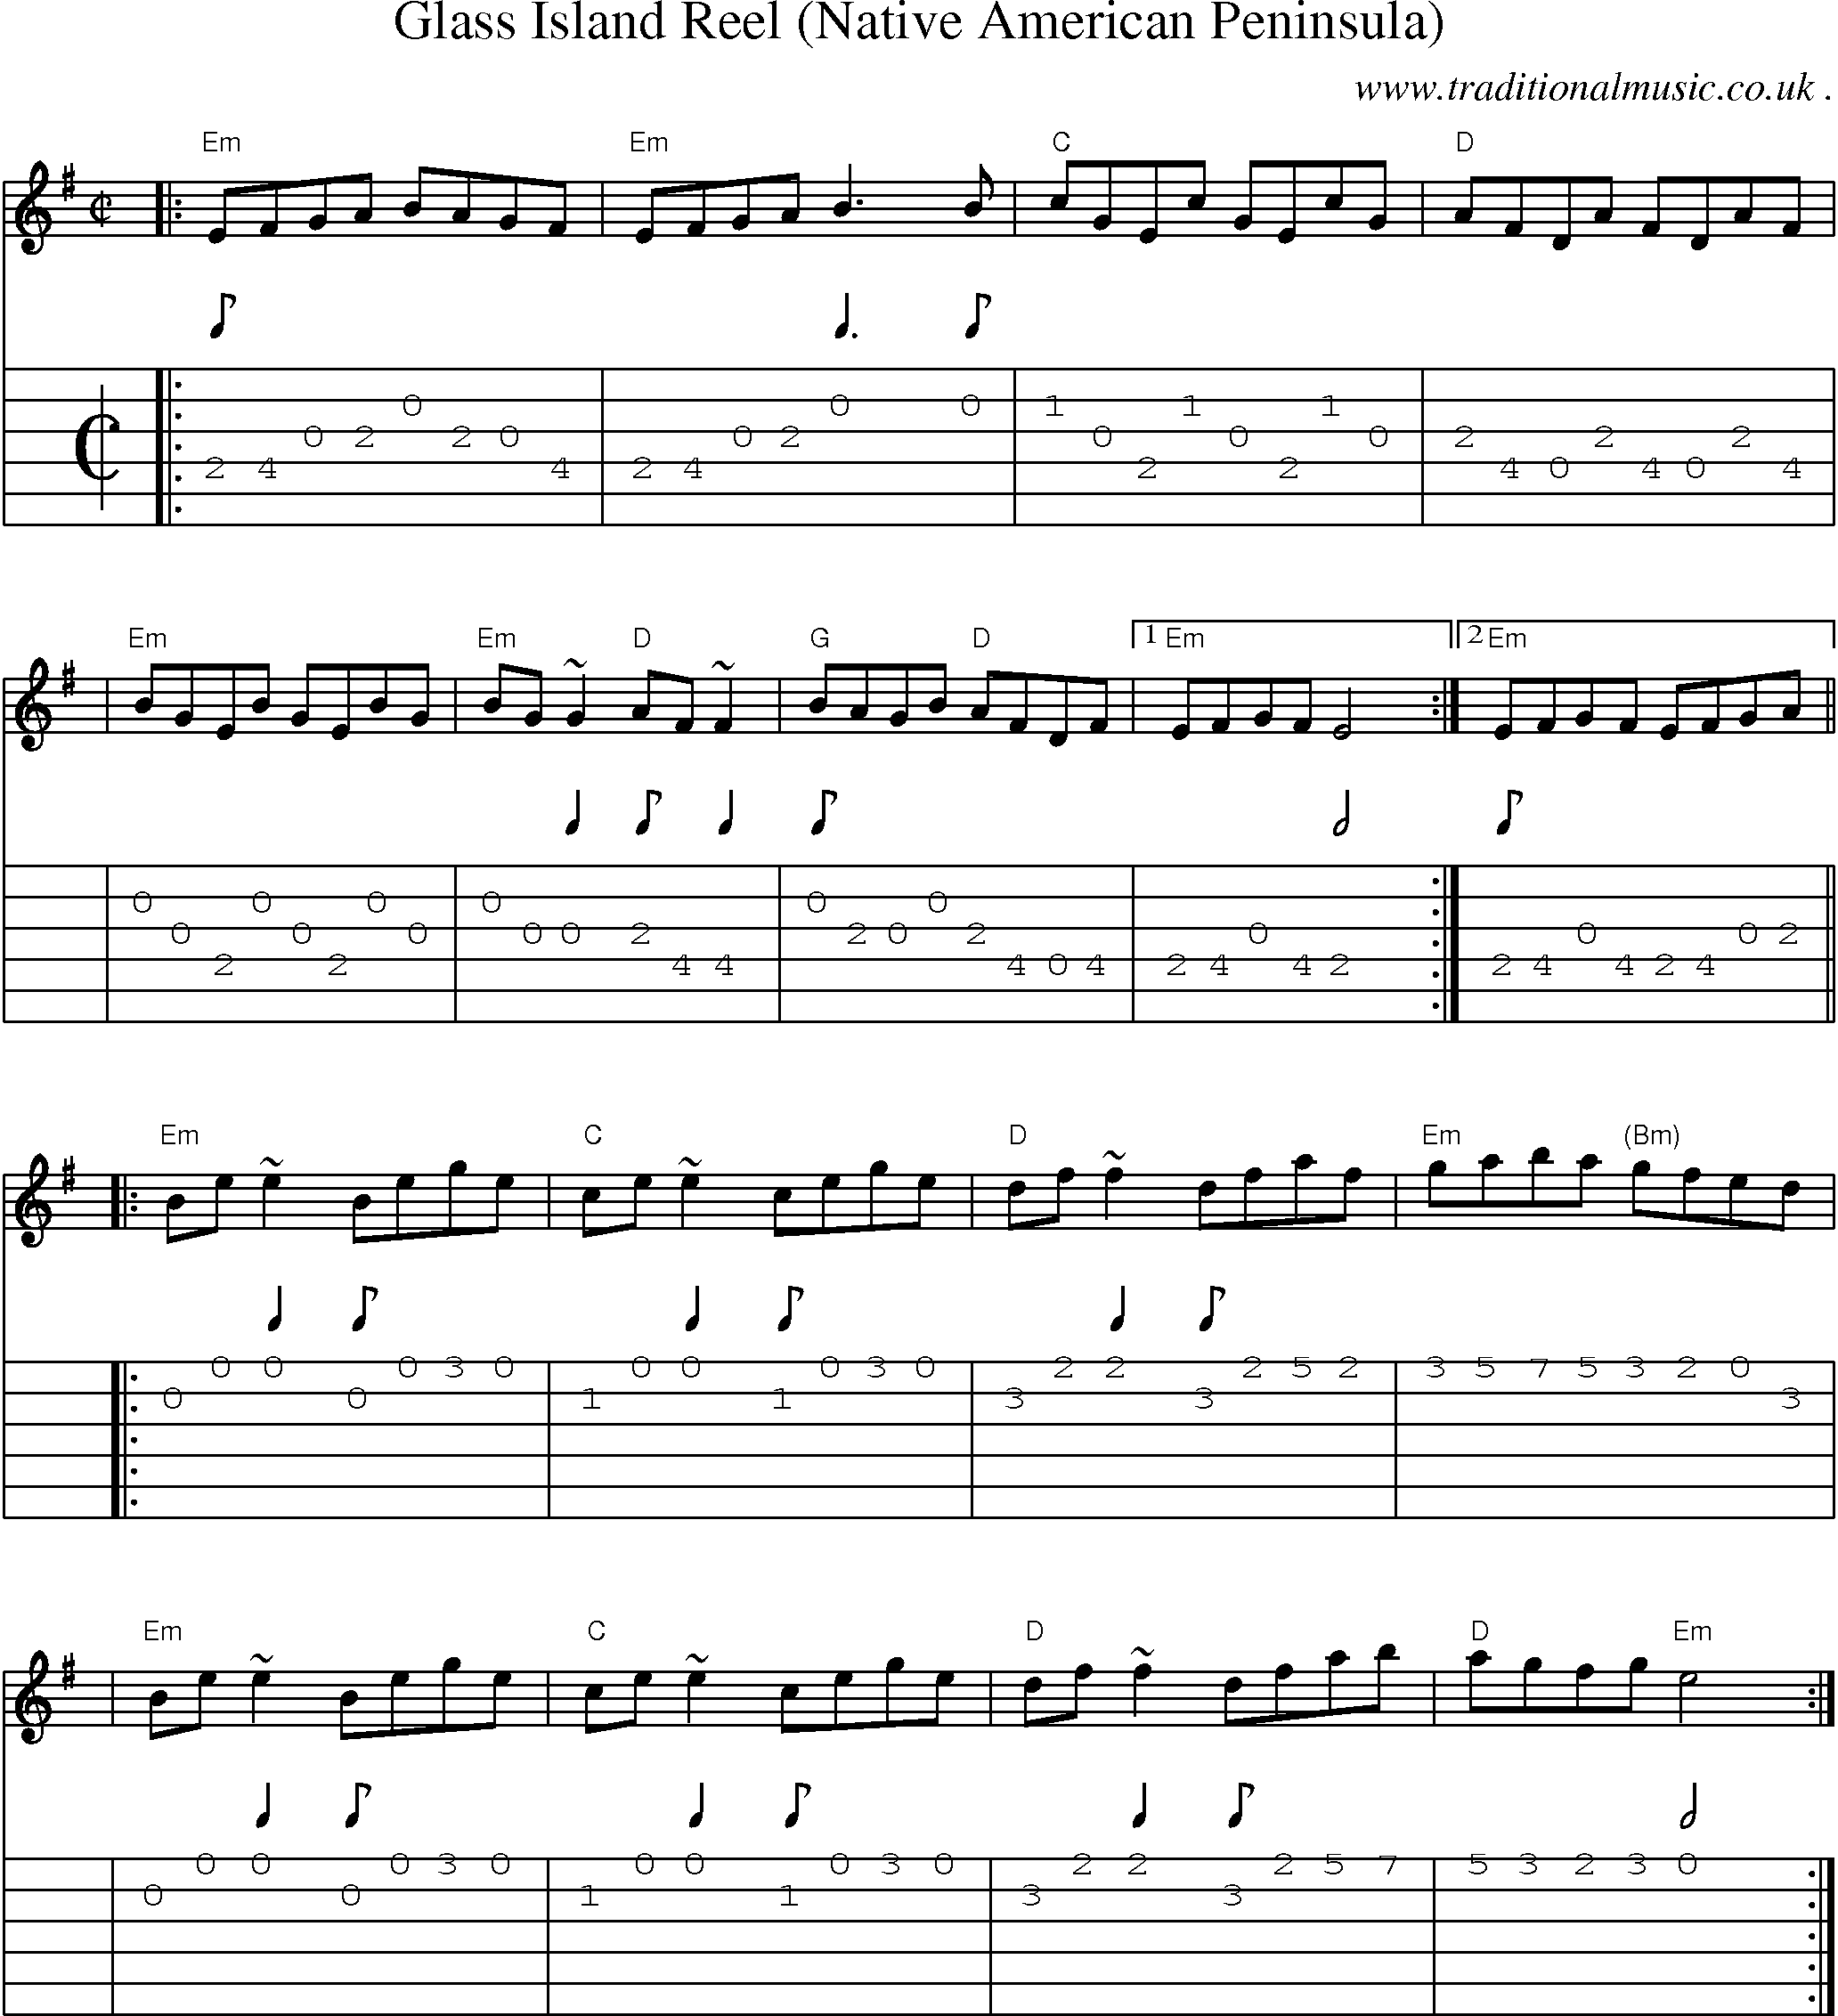 Sheet-music  score, Chords and Guitar Tabs for Glass Island Reel Native American Peninsula